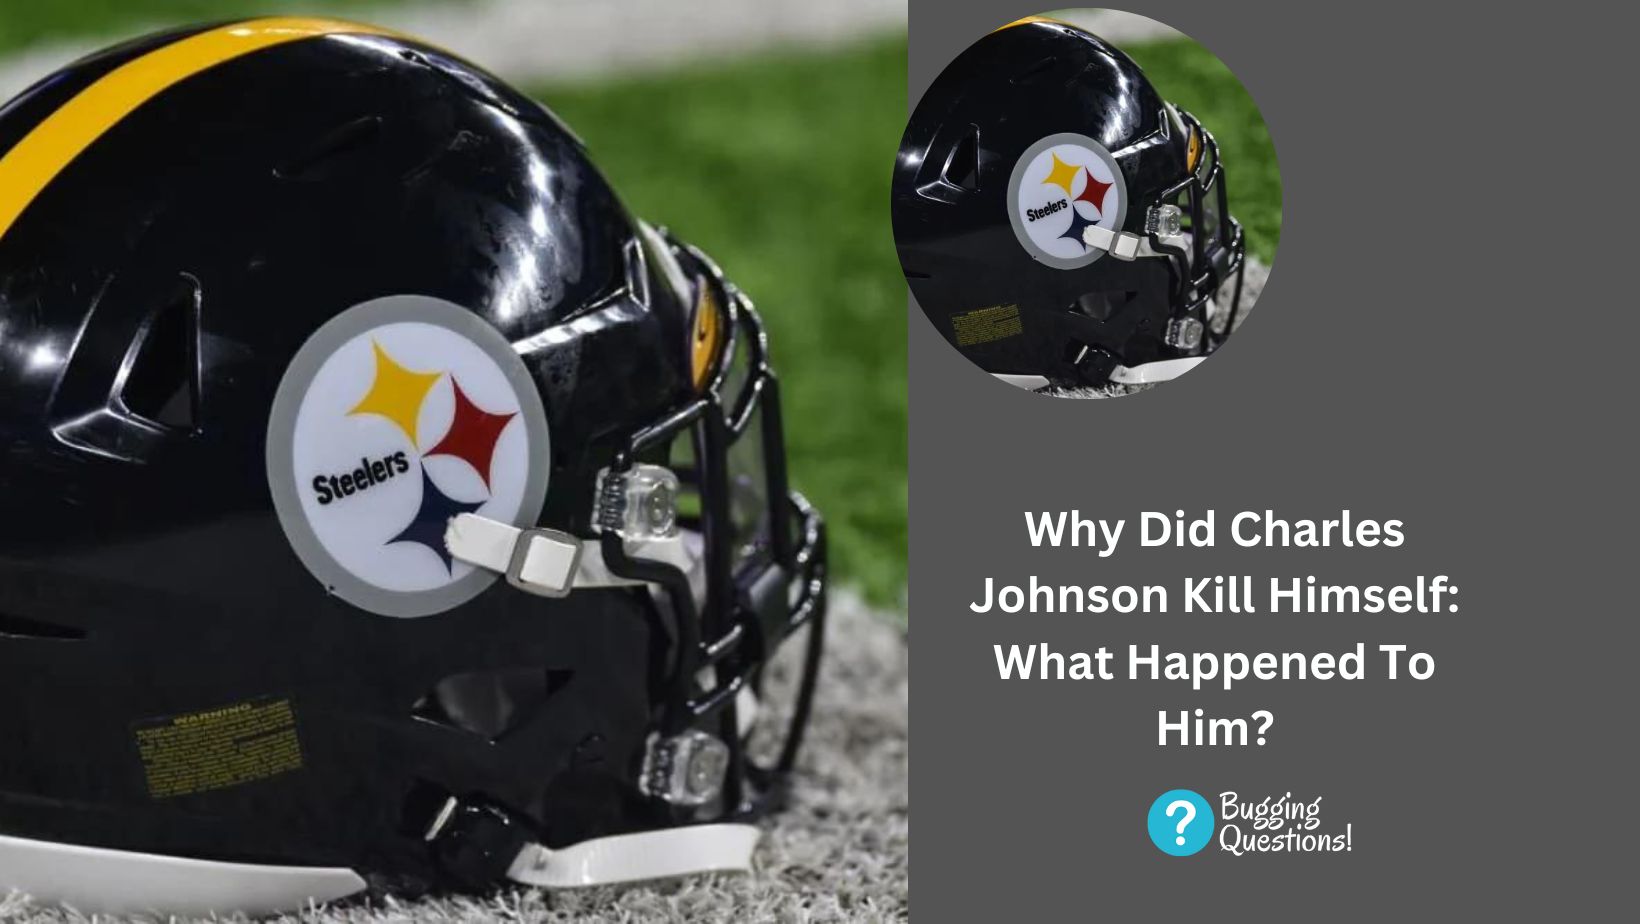 Why Did Charles Johnson Kill Himself: What Happened To Him?